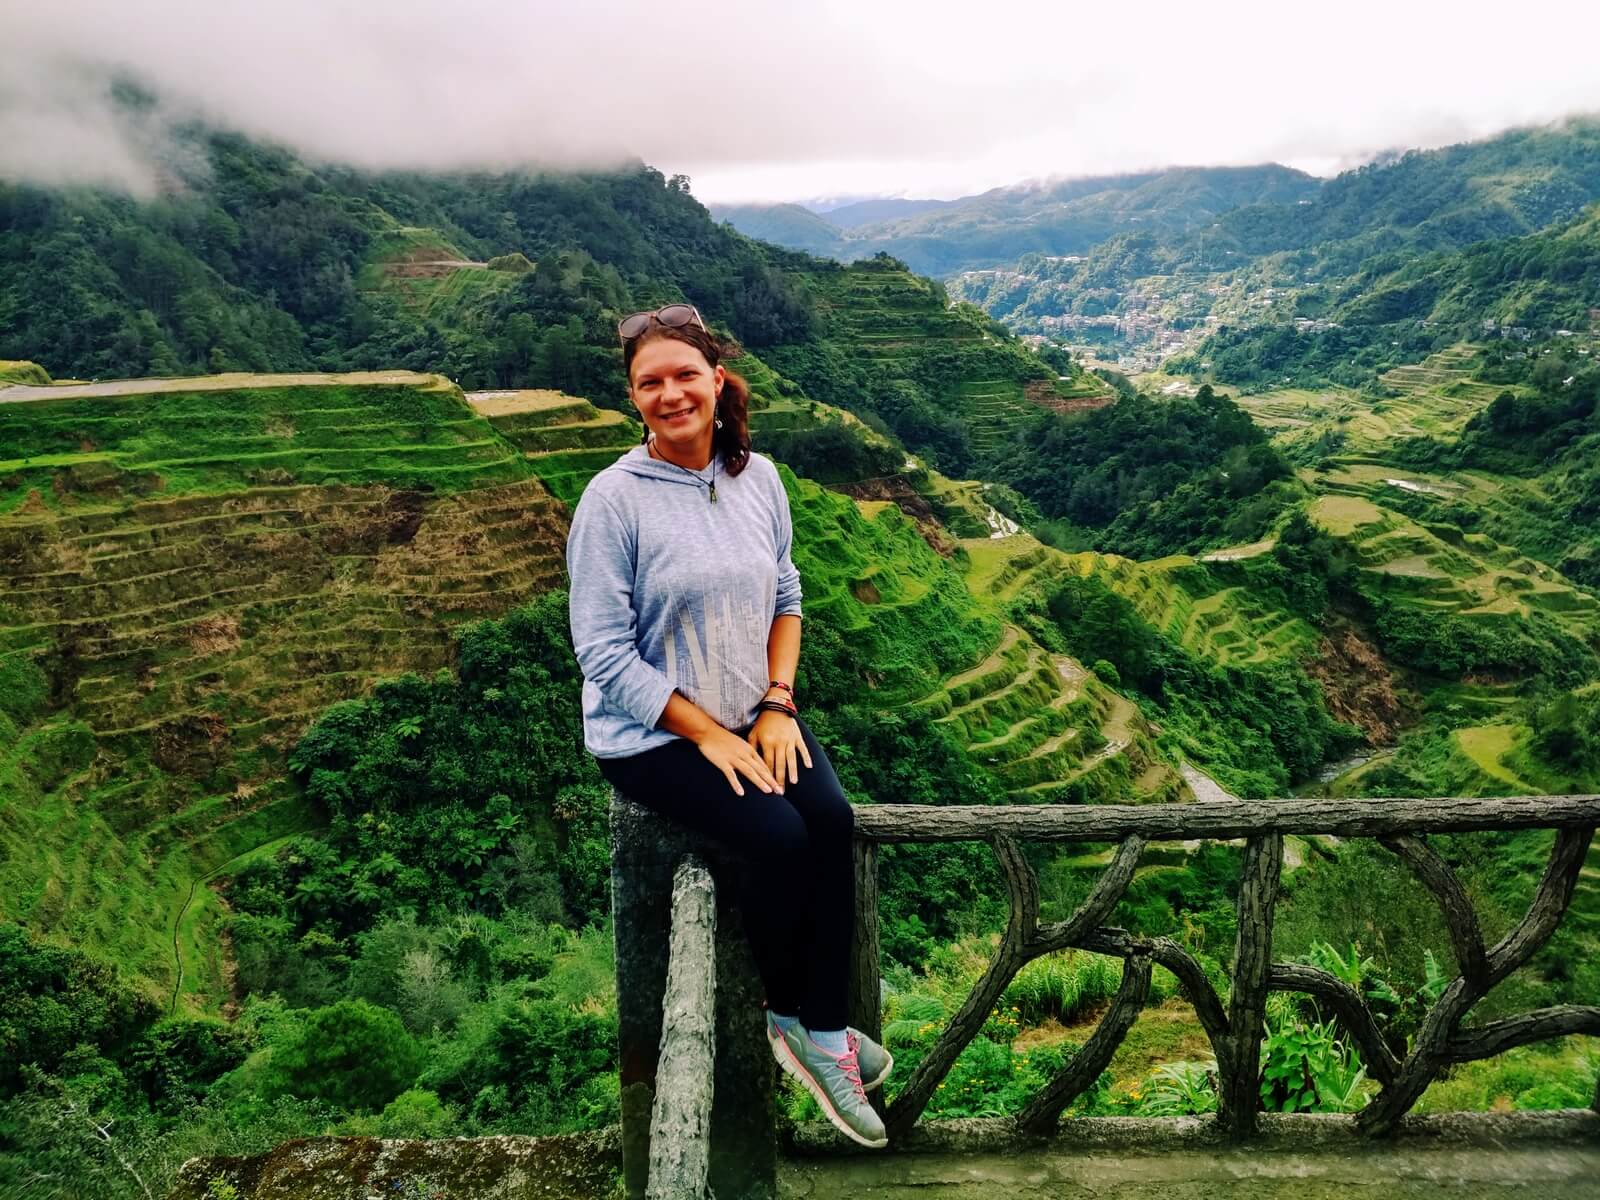 Banaue Rice Terraces - When NOT to Explore this Highlight of the